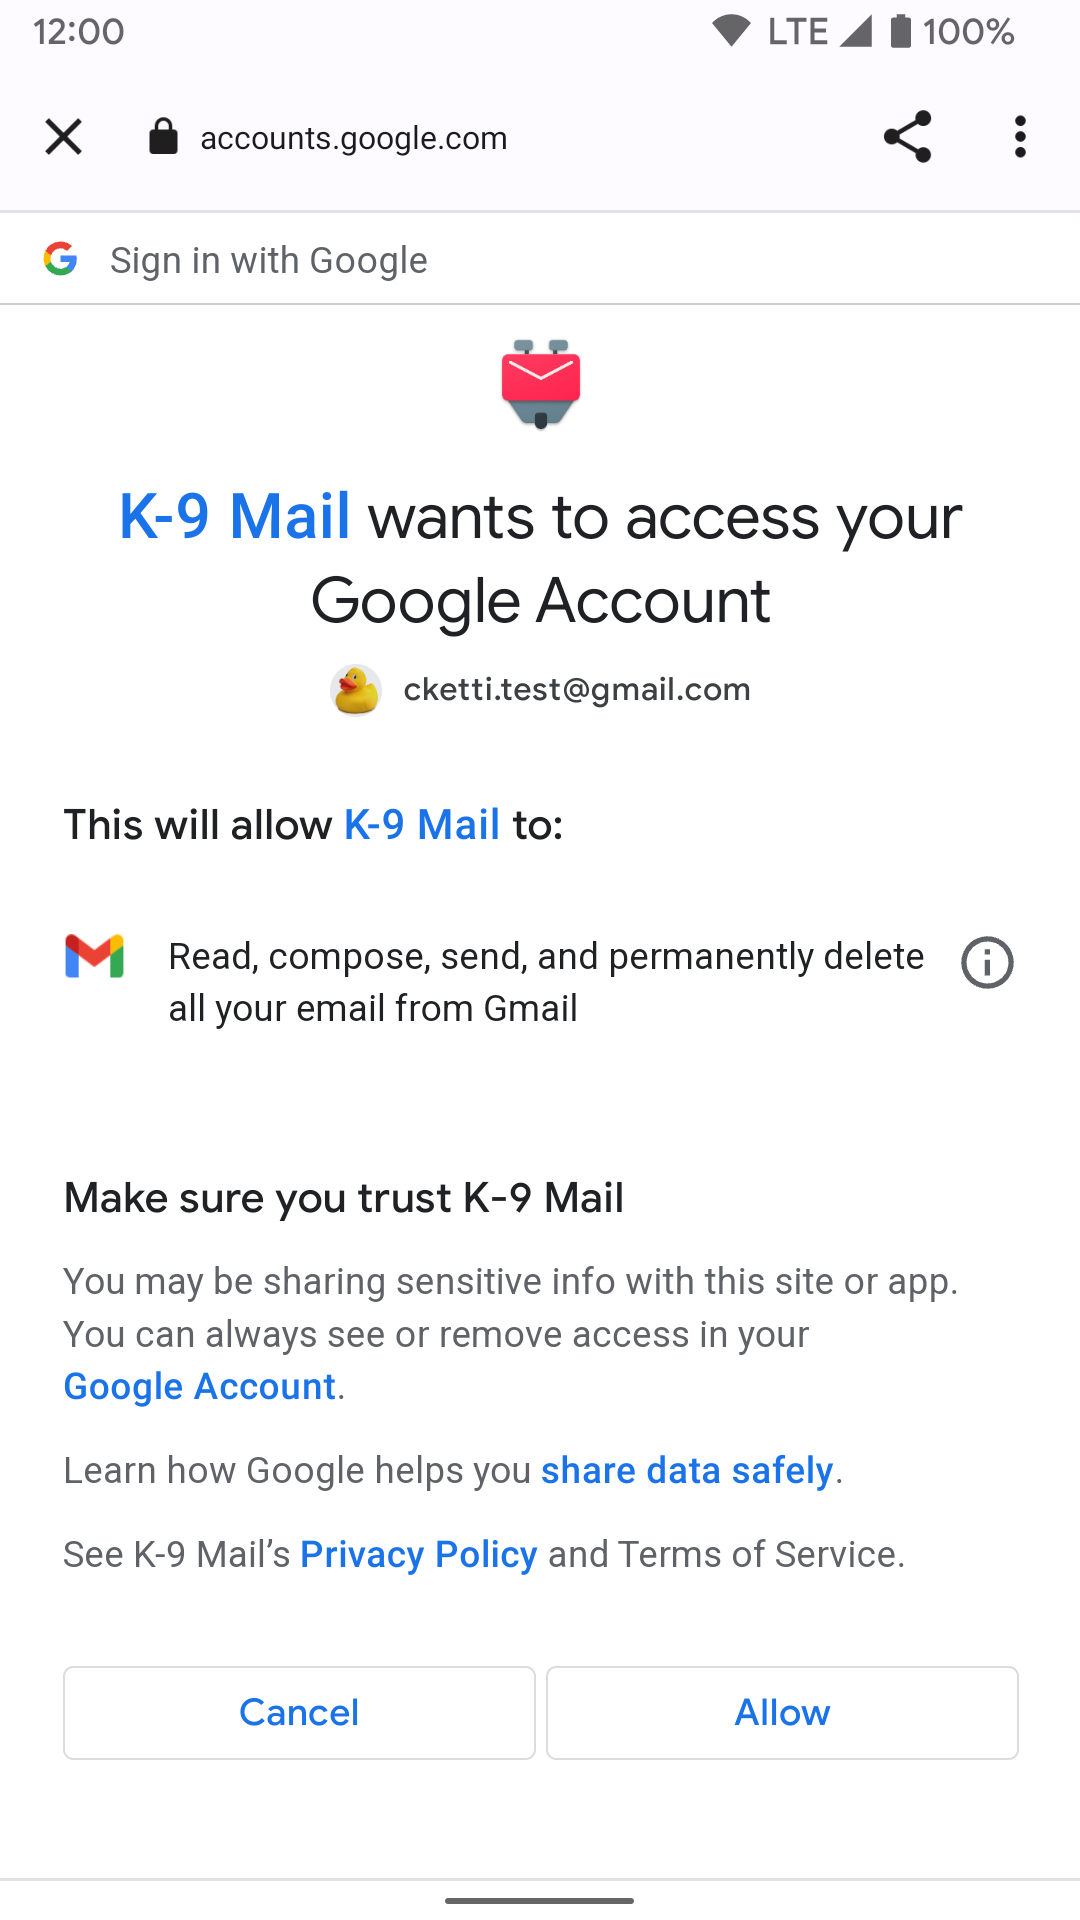 How do I sign in with my Google email?